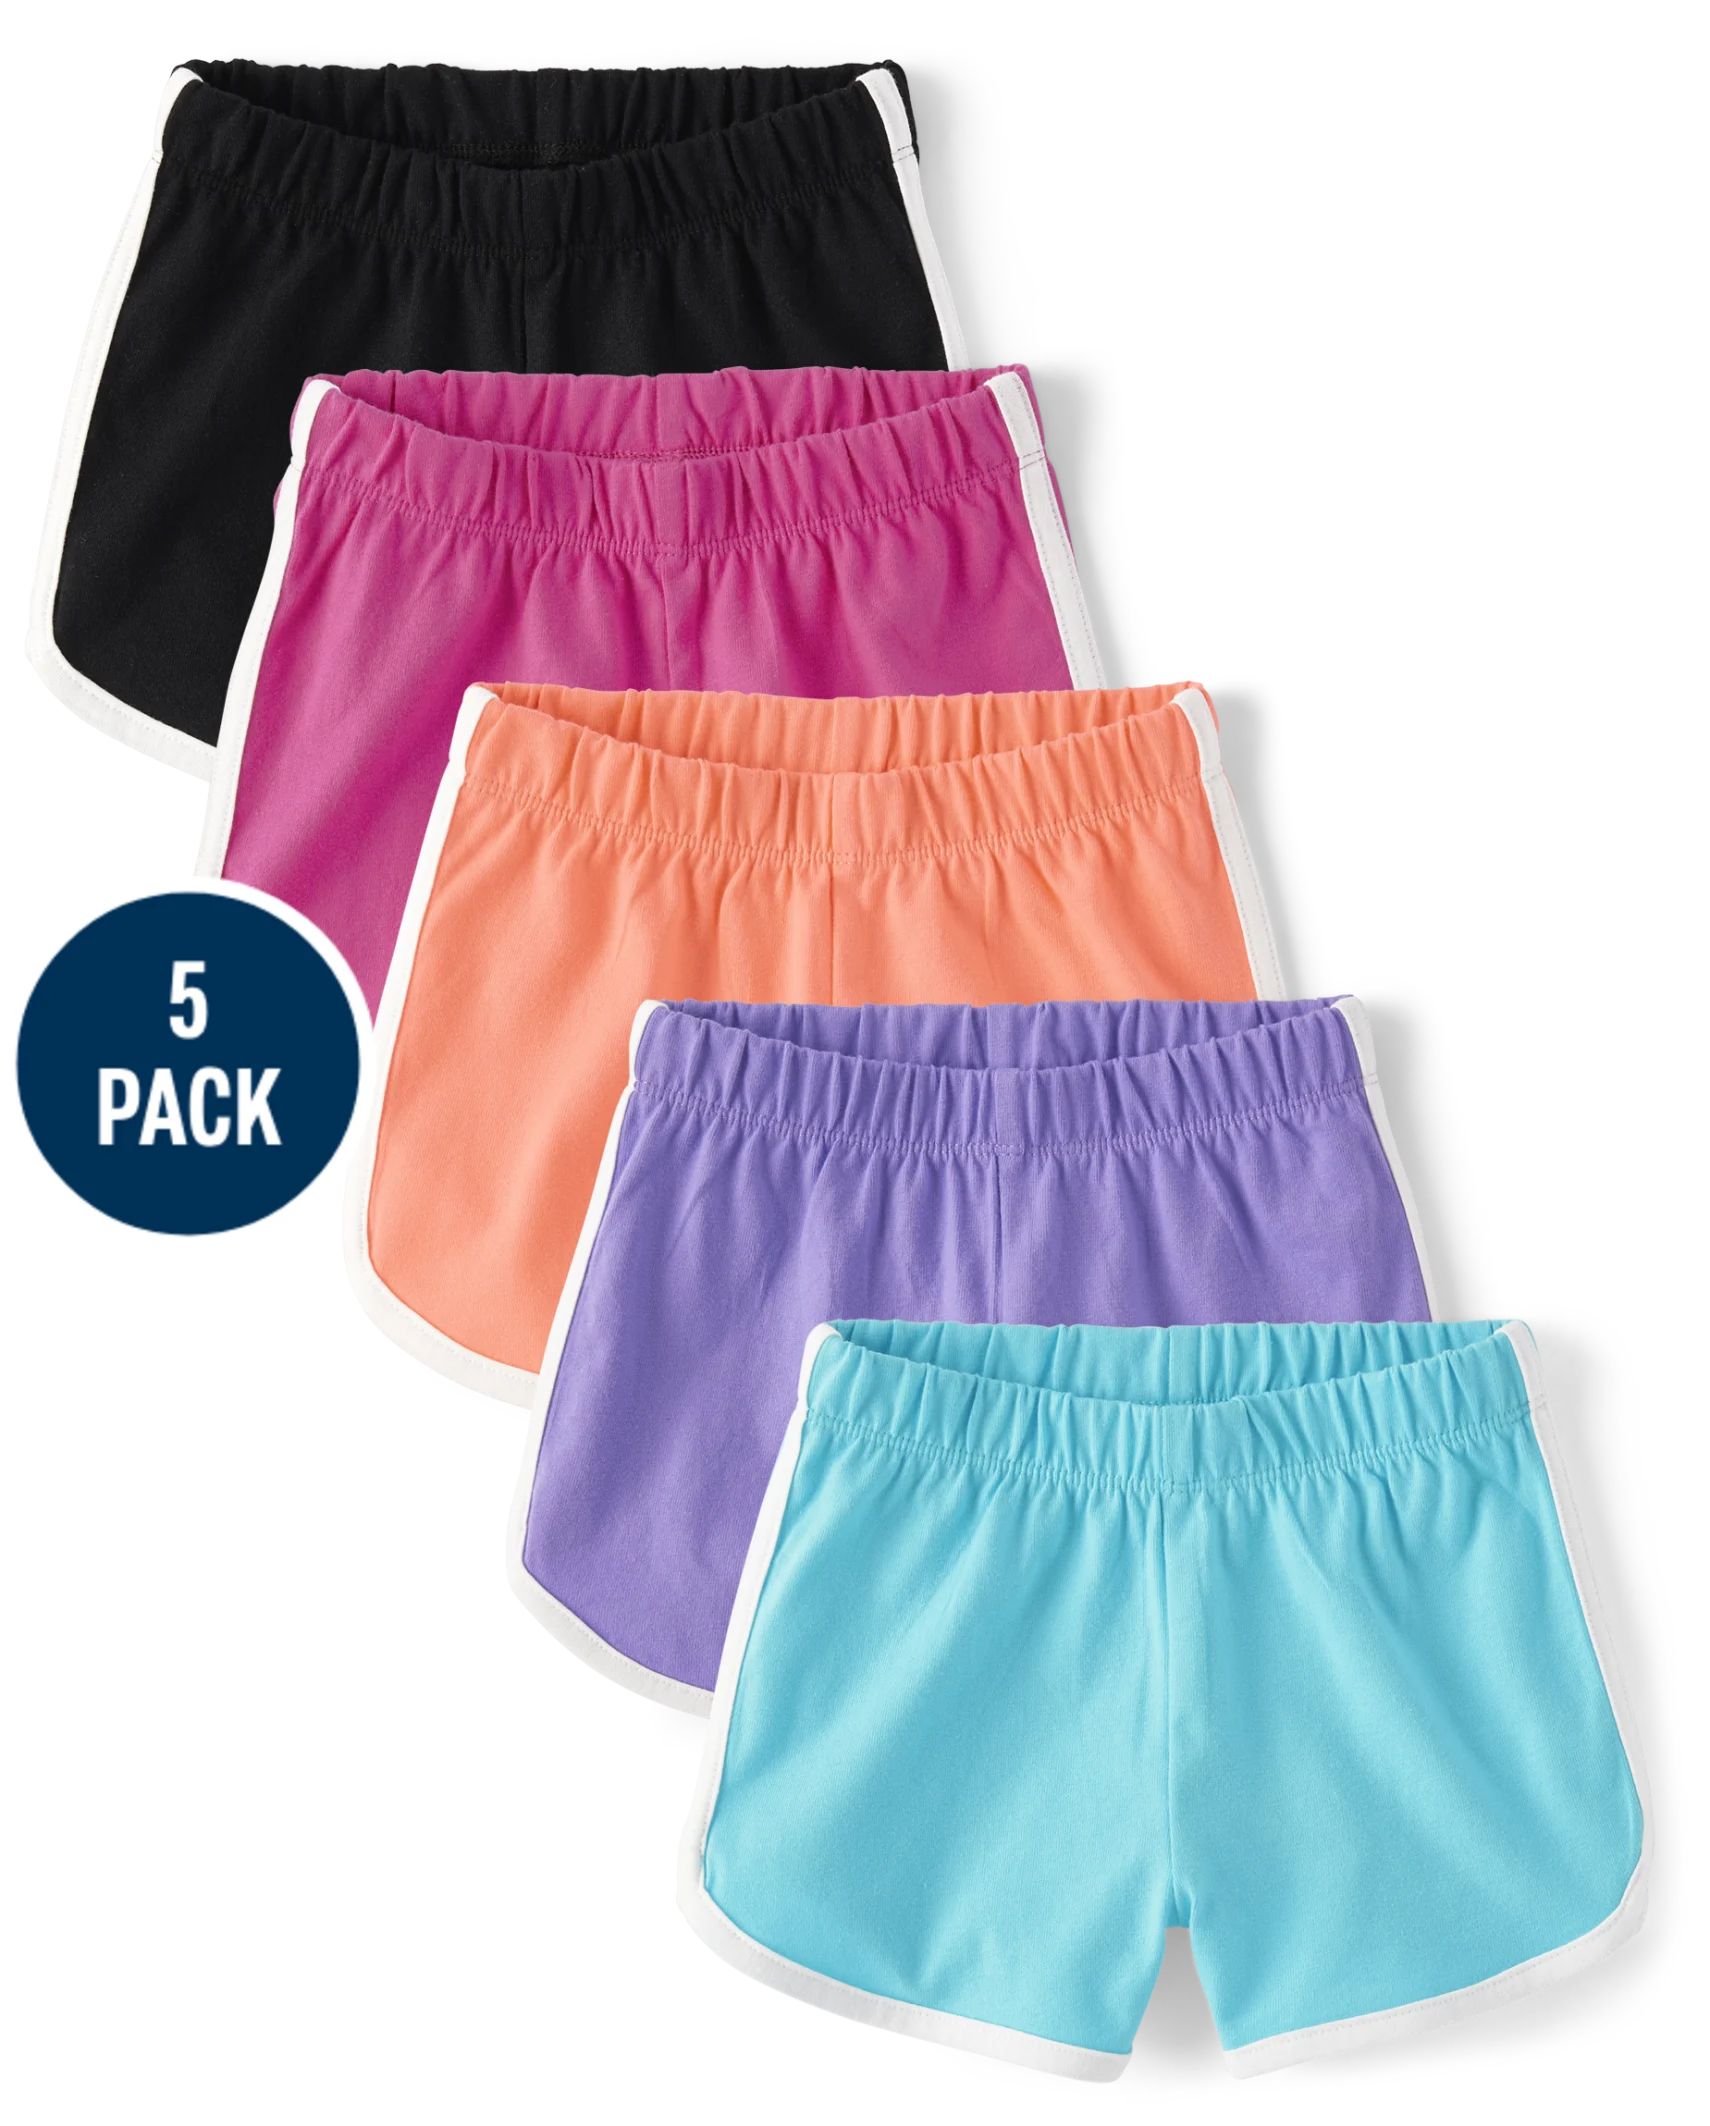 Toddler Girls Dolphin Shorts 5-Pack - black | The Children's Place